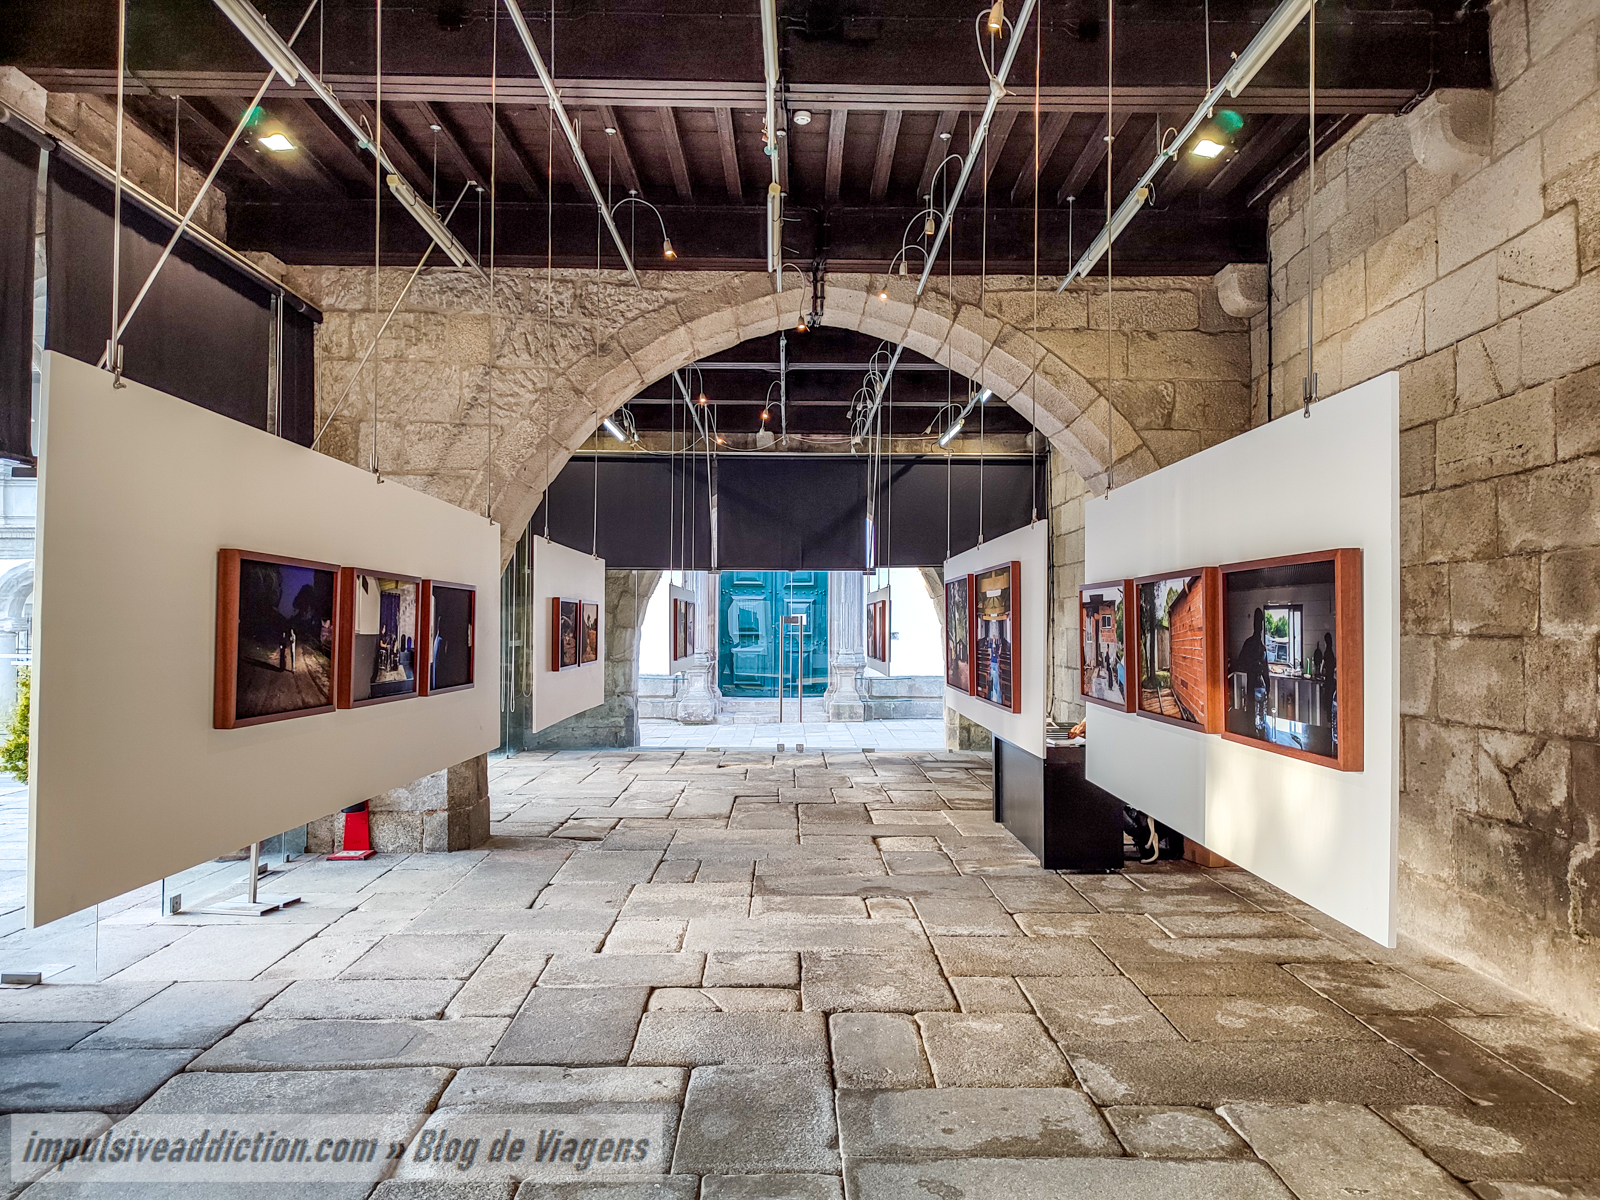 Temporary Exhibition at the Old Town Hall building